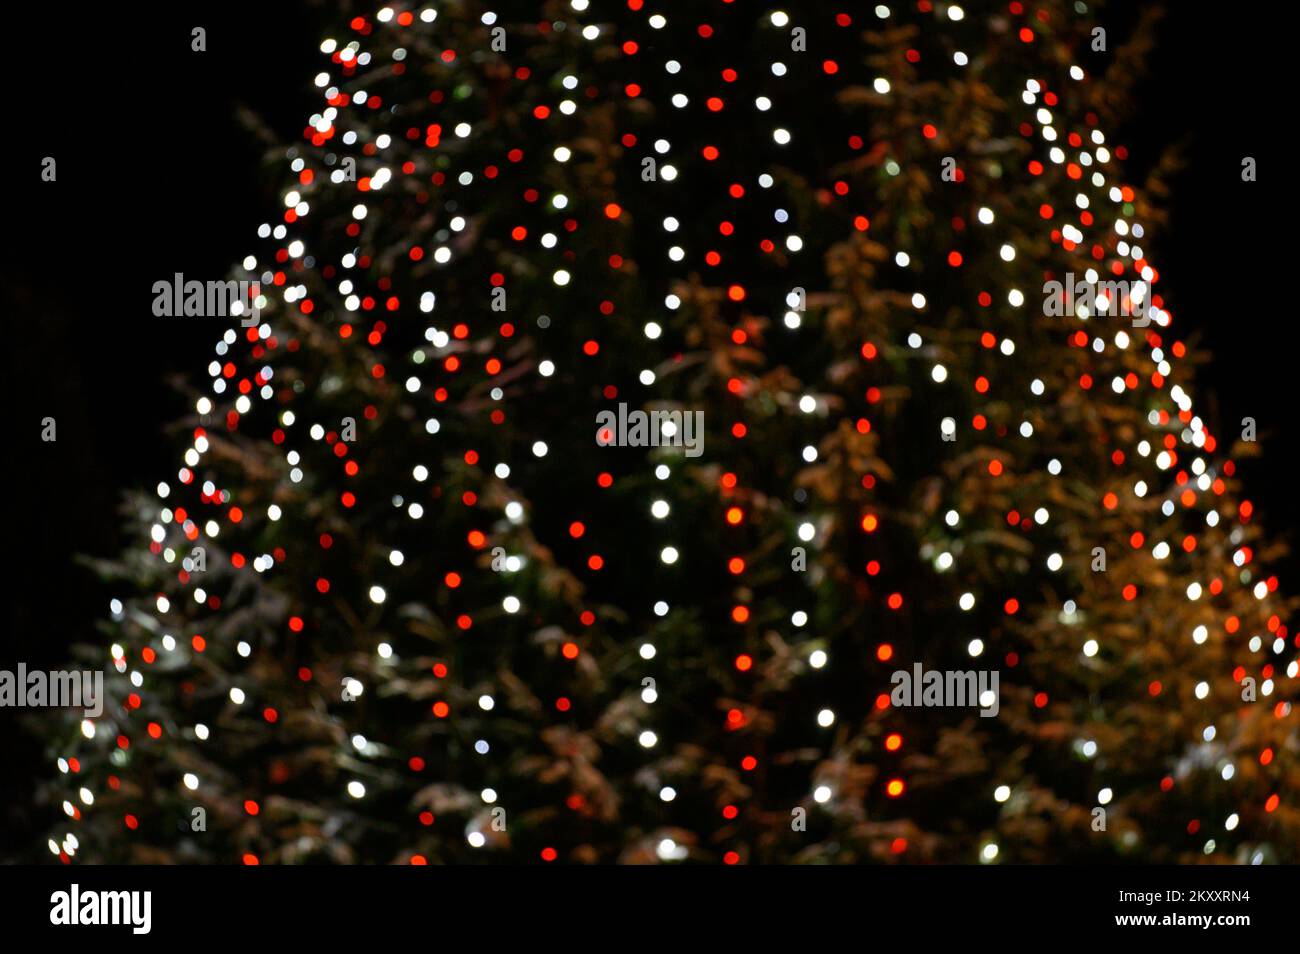 Abstract christmas background with christmas tree with decorations, defocused bokeh lights outdoors. Stock Photo